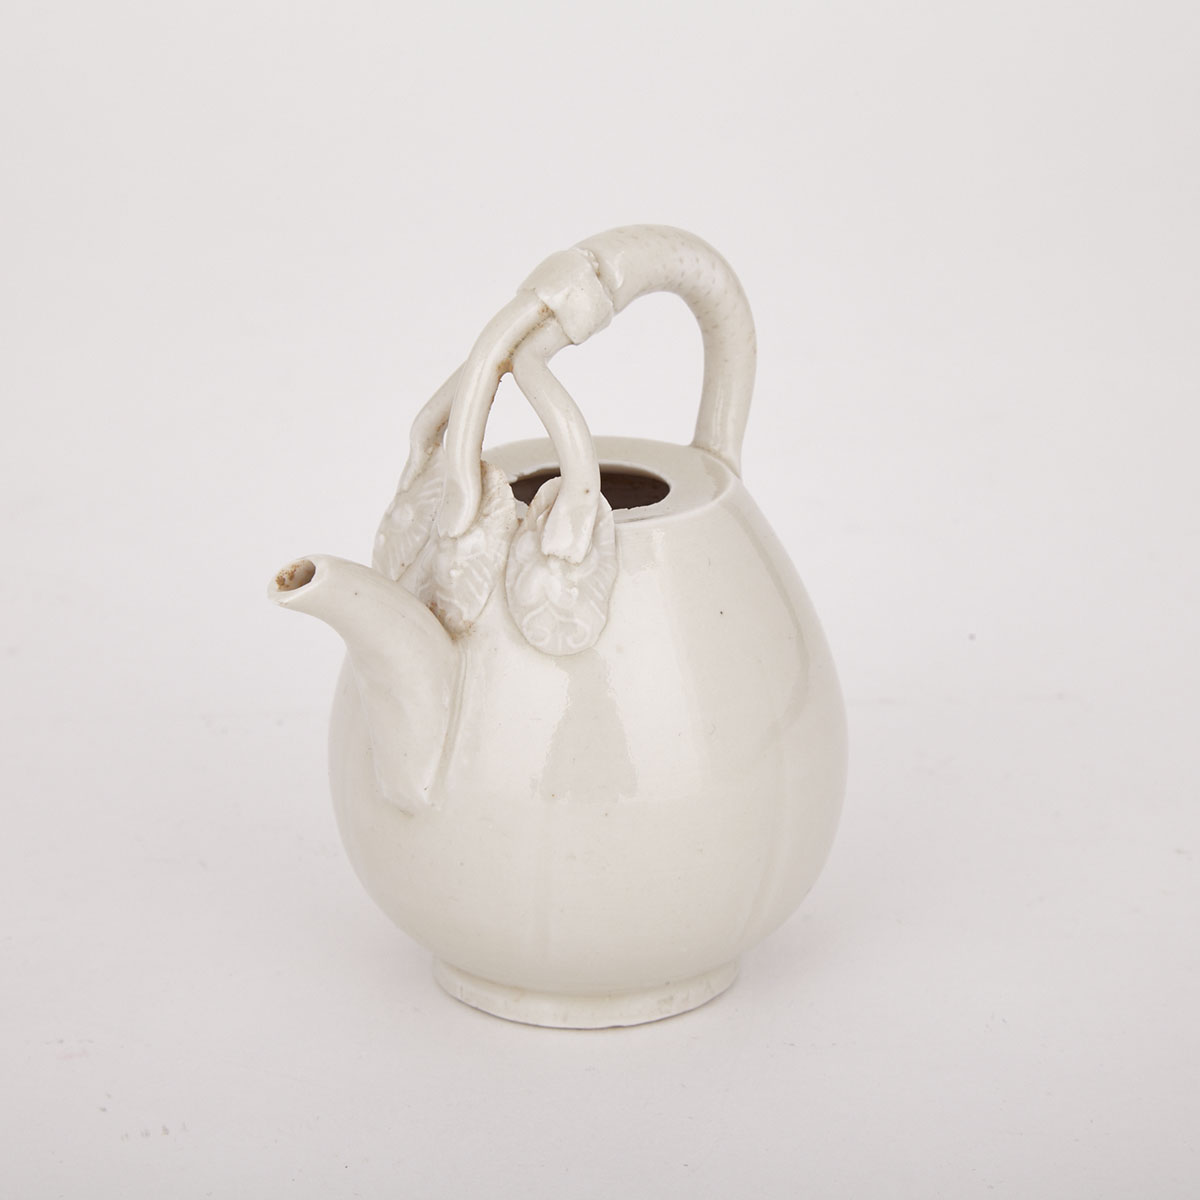 A SMALL 'DING' EWER, possibly Liao/Song Dynasty